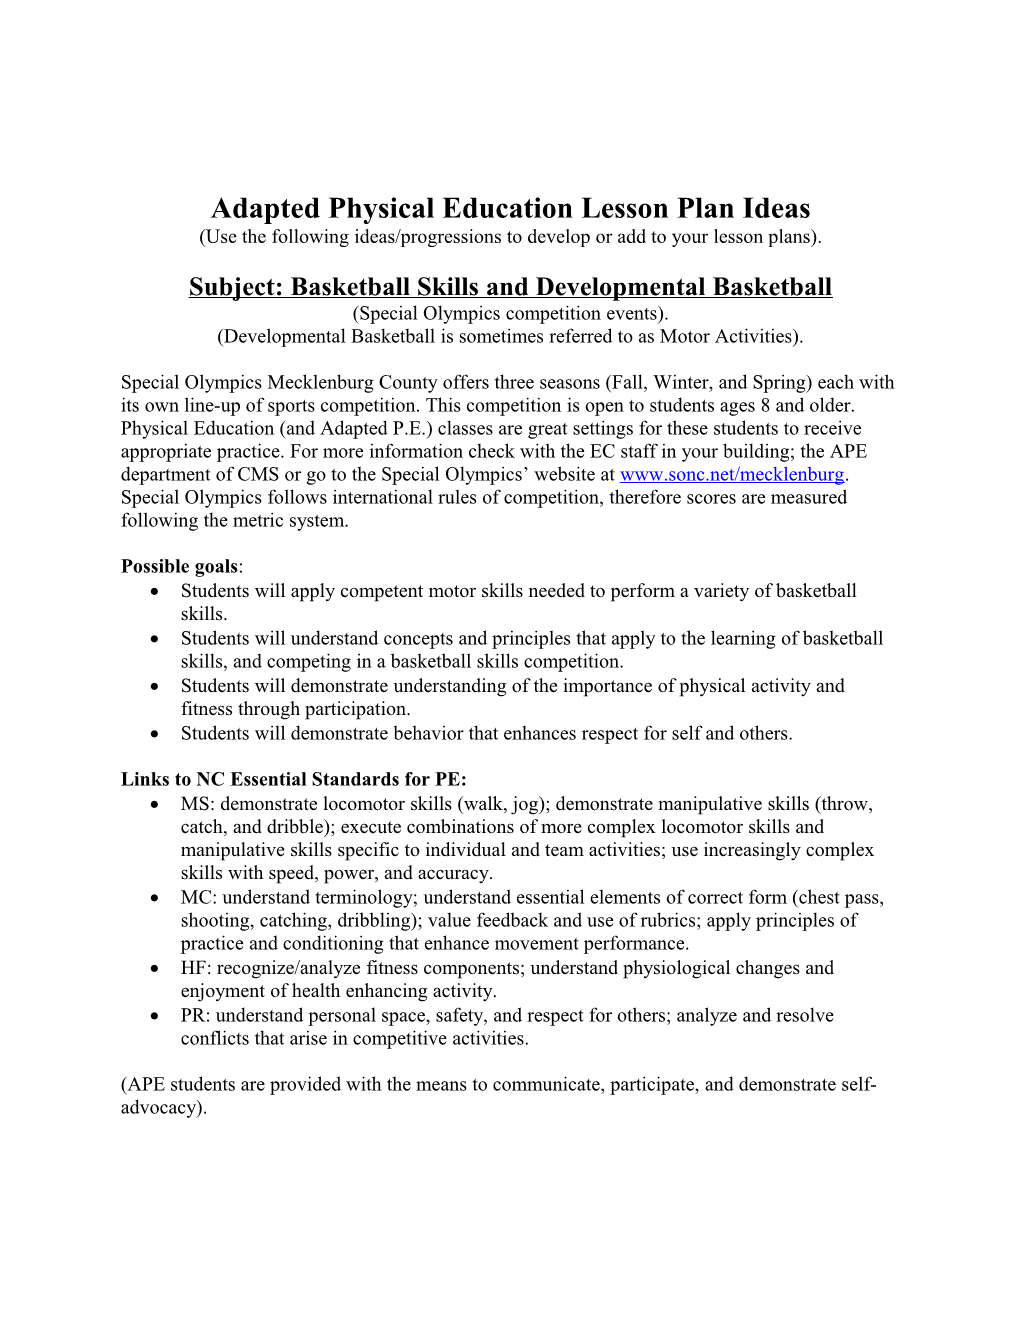 Adapted Physical Education Lesson Plan Ideas